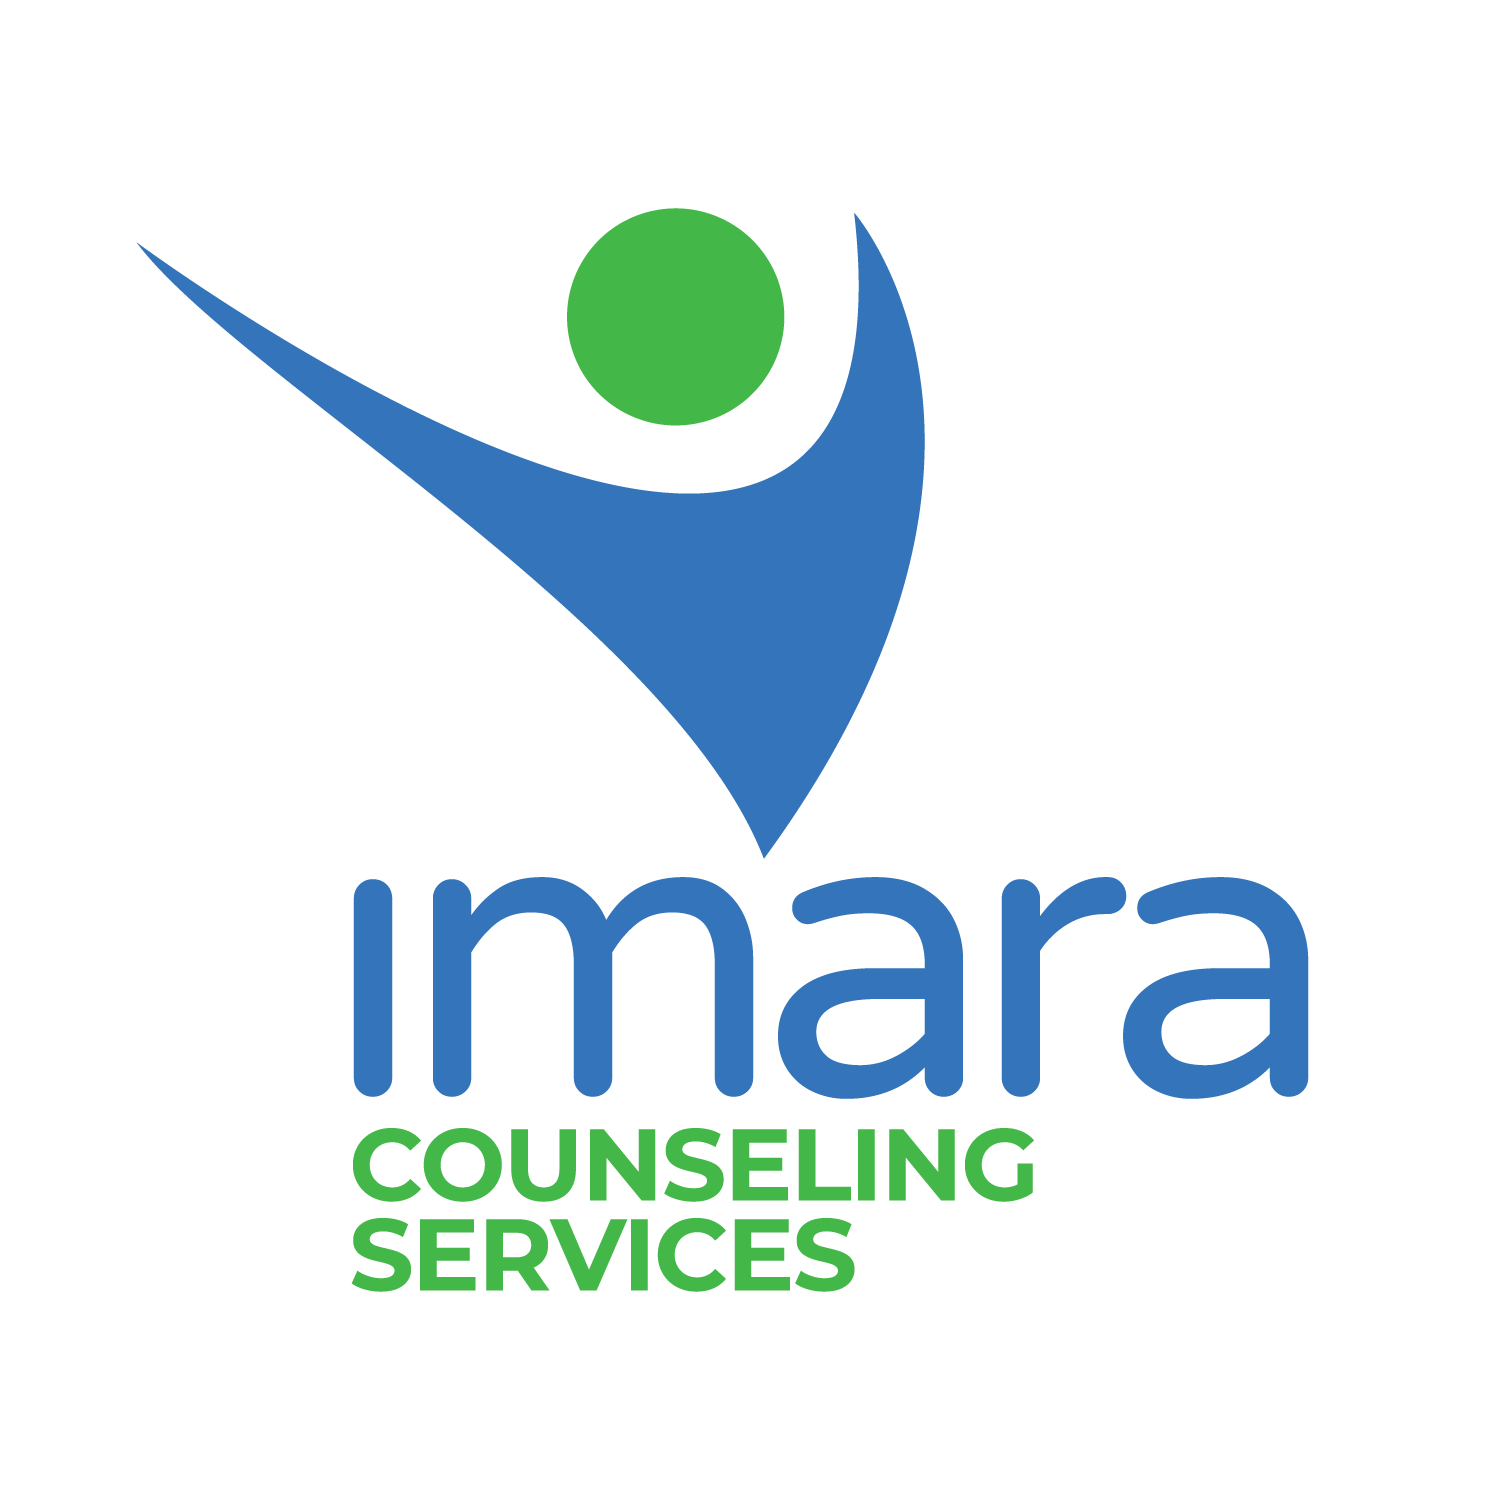 Imara Counseling Services